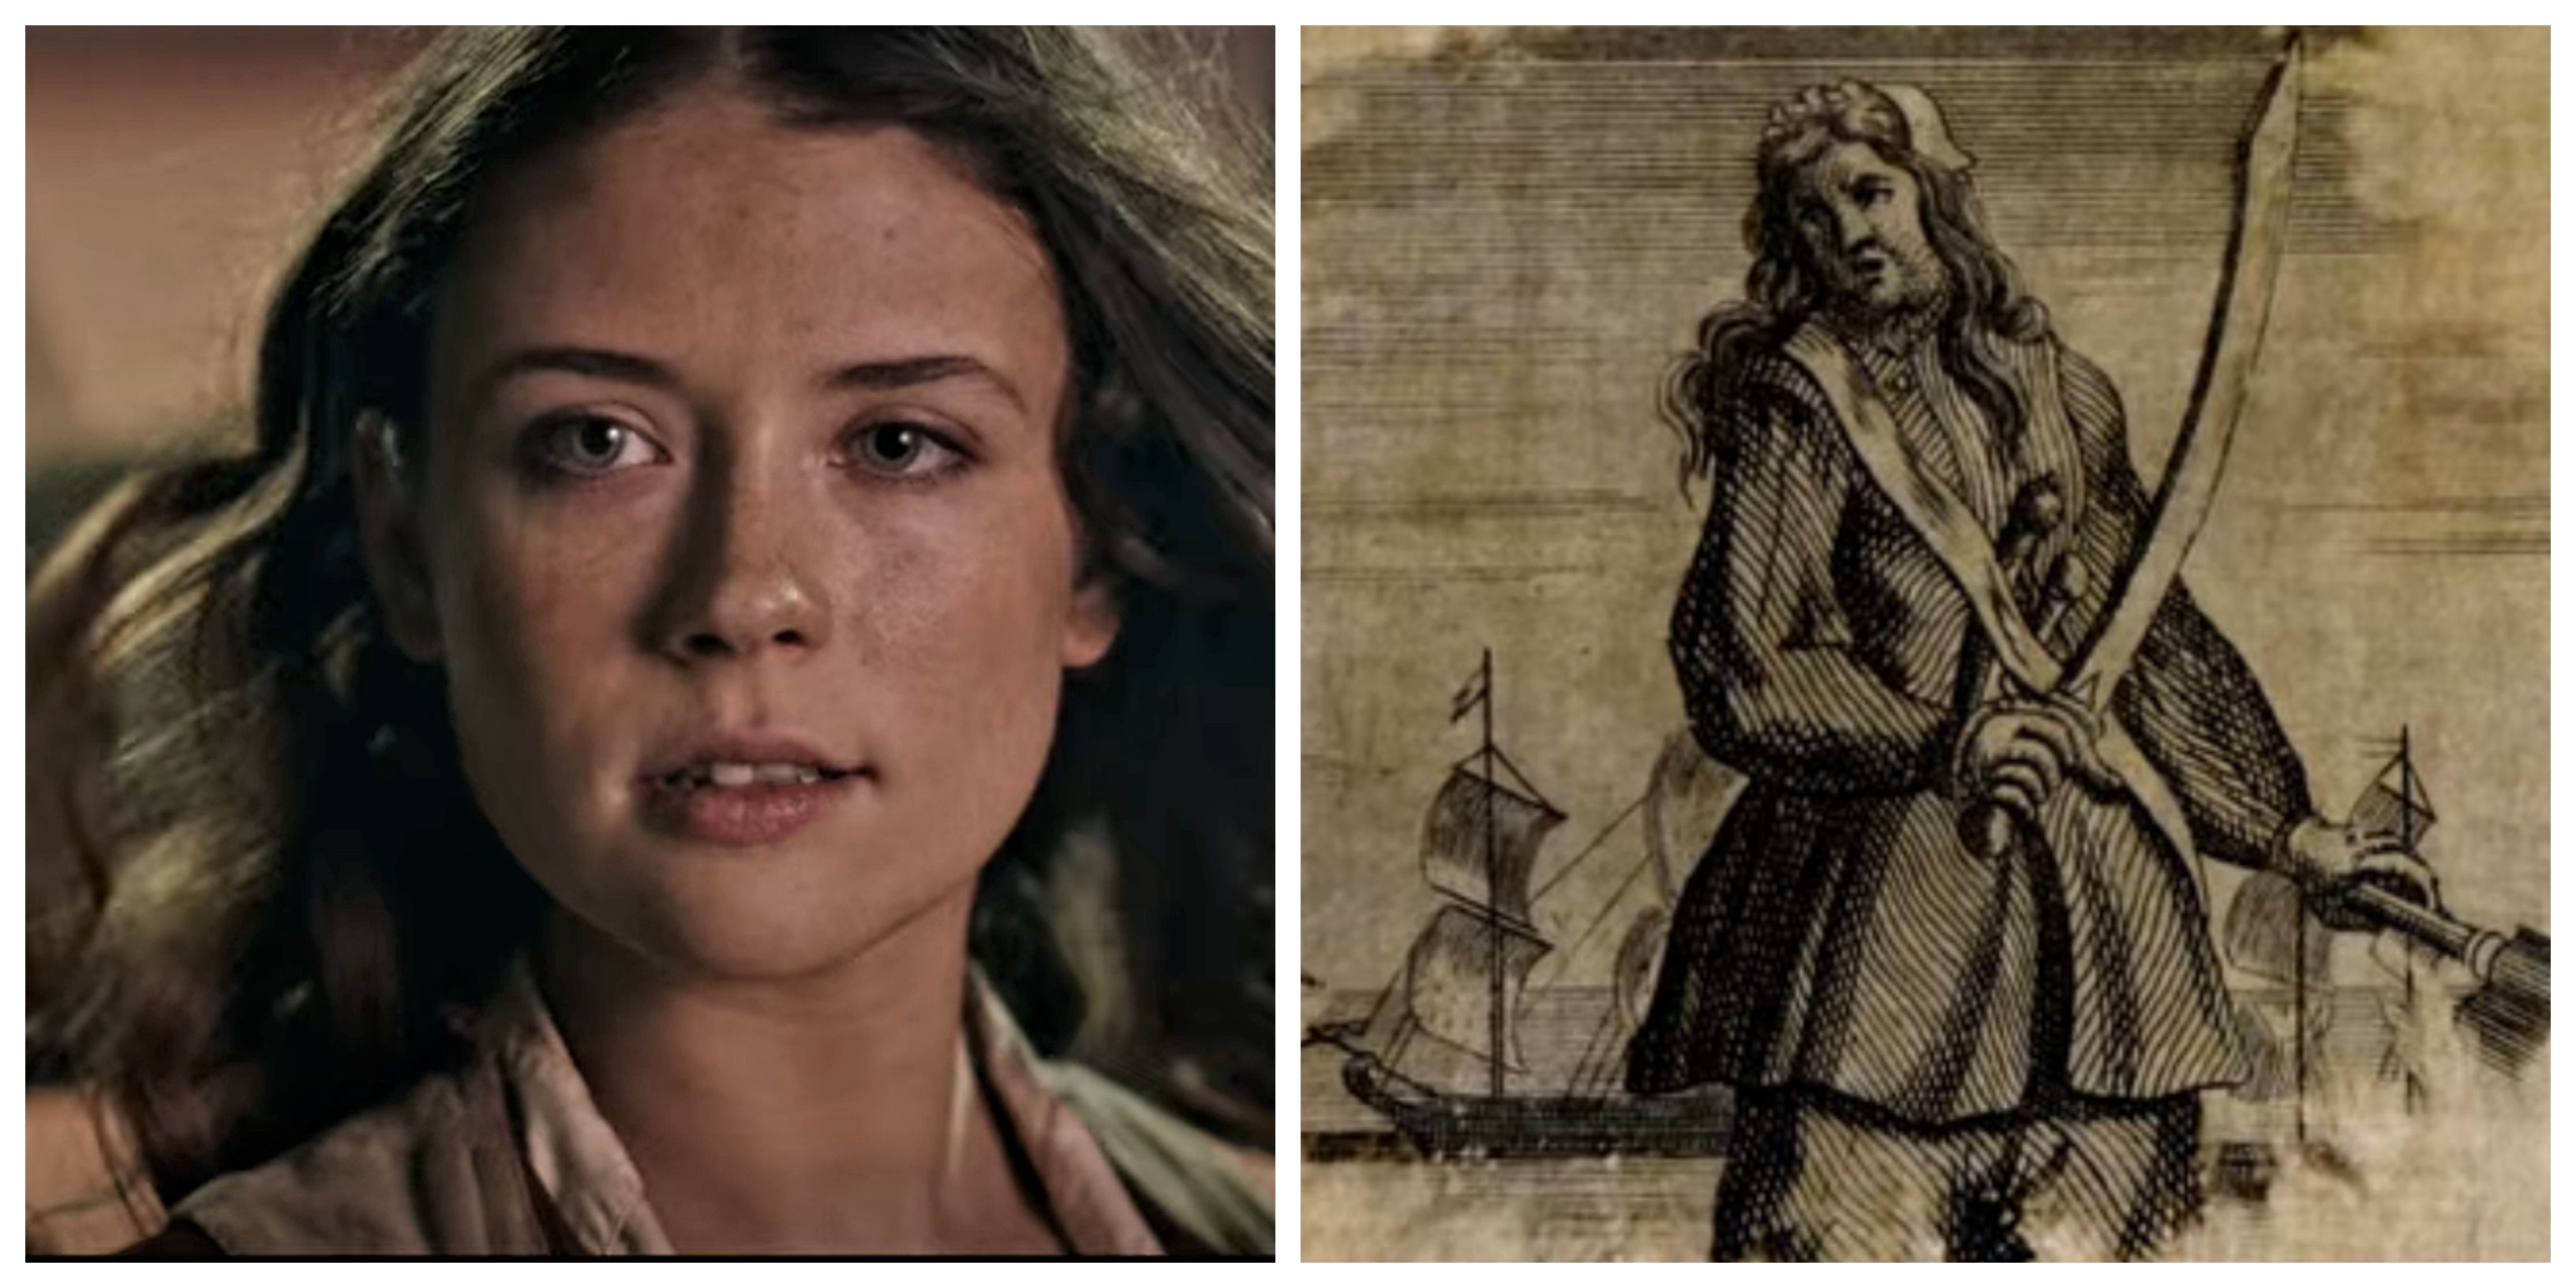 Mia Tomlinson as Anne Bonny in The Lost Pirate Kingdom on Netflix